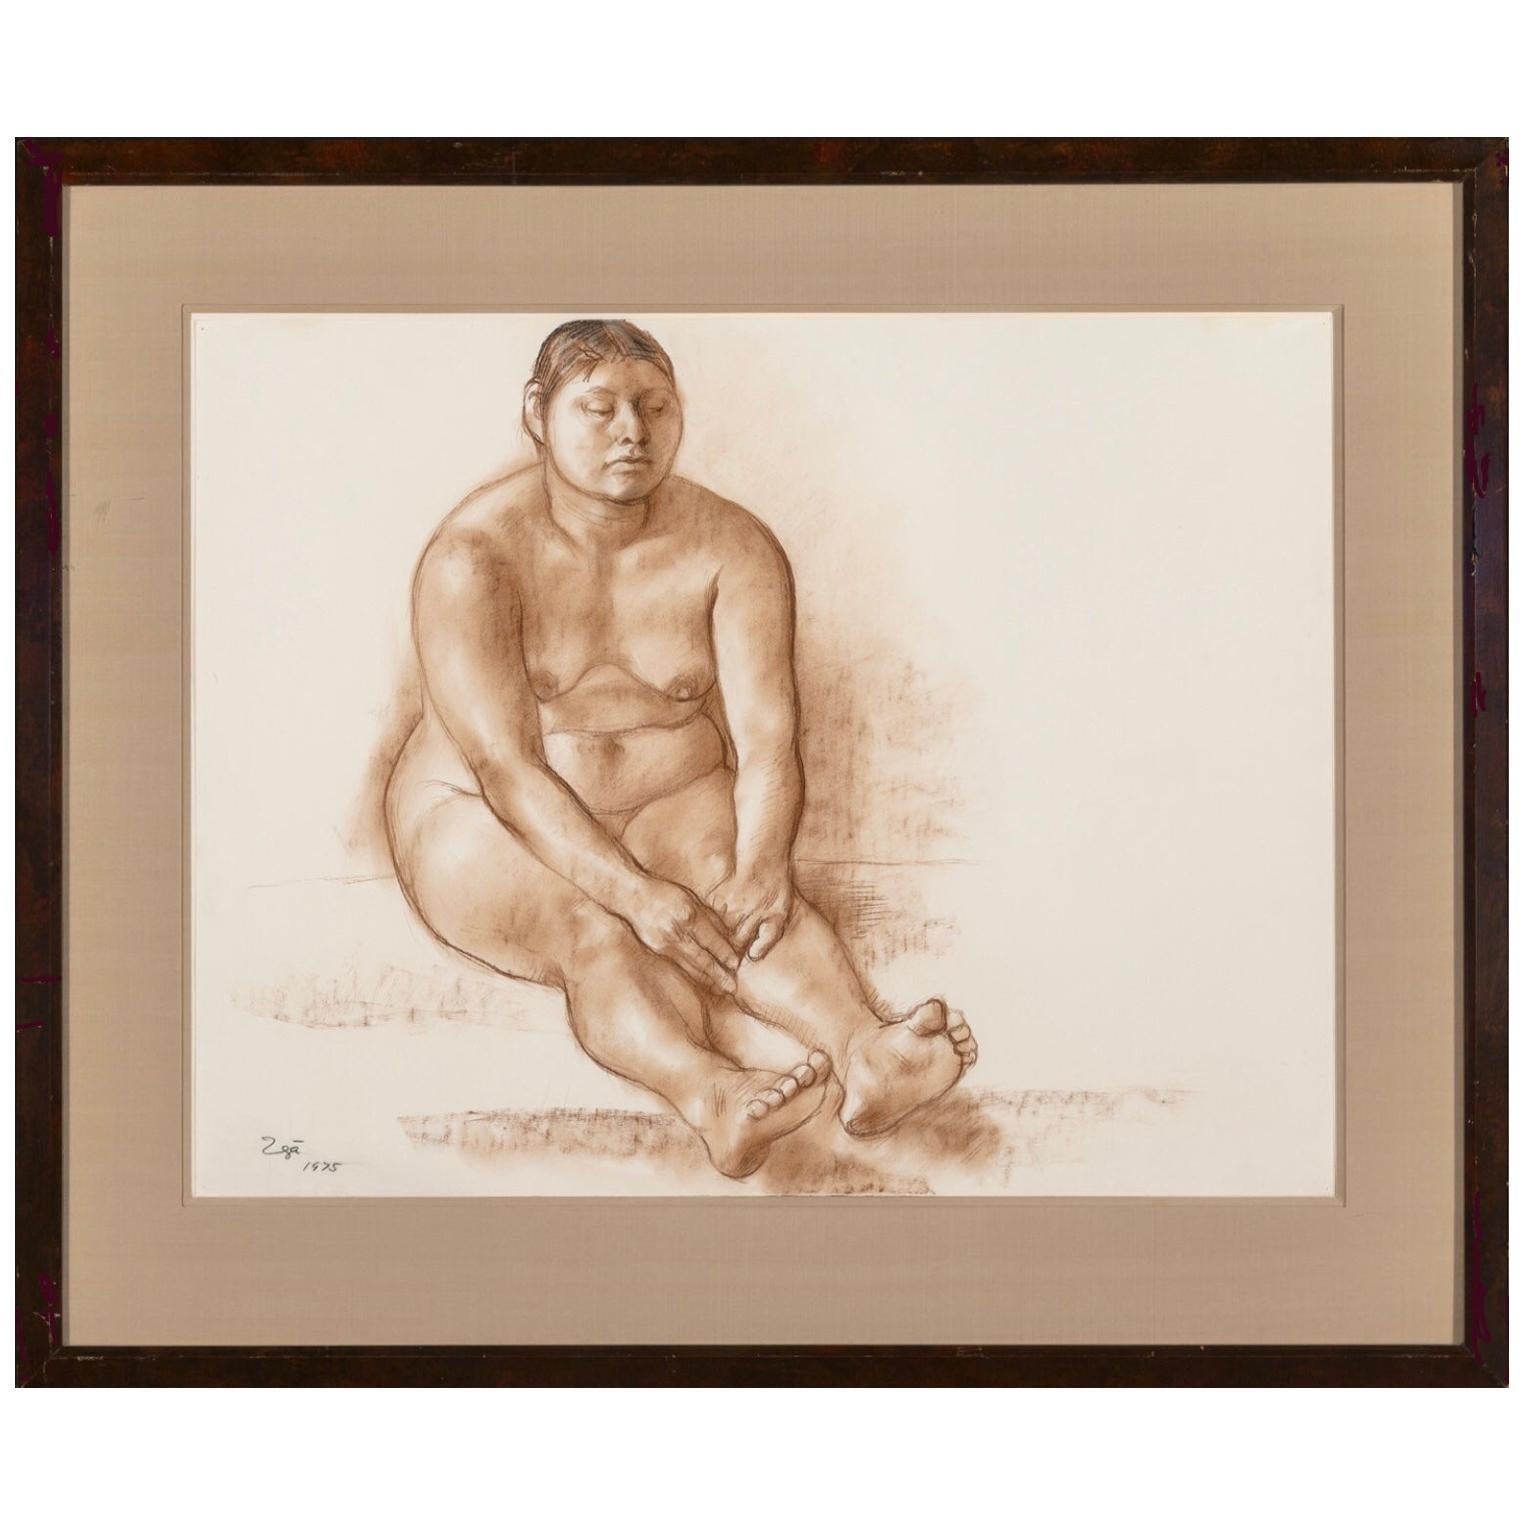 Francisco Zúñiga (Mexican, 1912-1998) Seated nude with extended legs. This woman with eyes heavy in meditation shows a myriad of emotions including humility, vulnerability and fatigue. The figure makes the viewer appreciate those who do all the